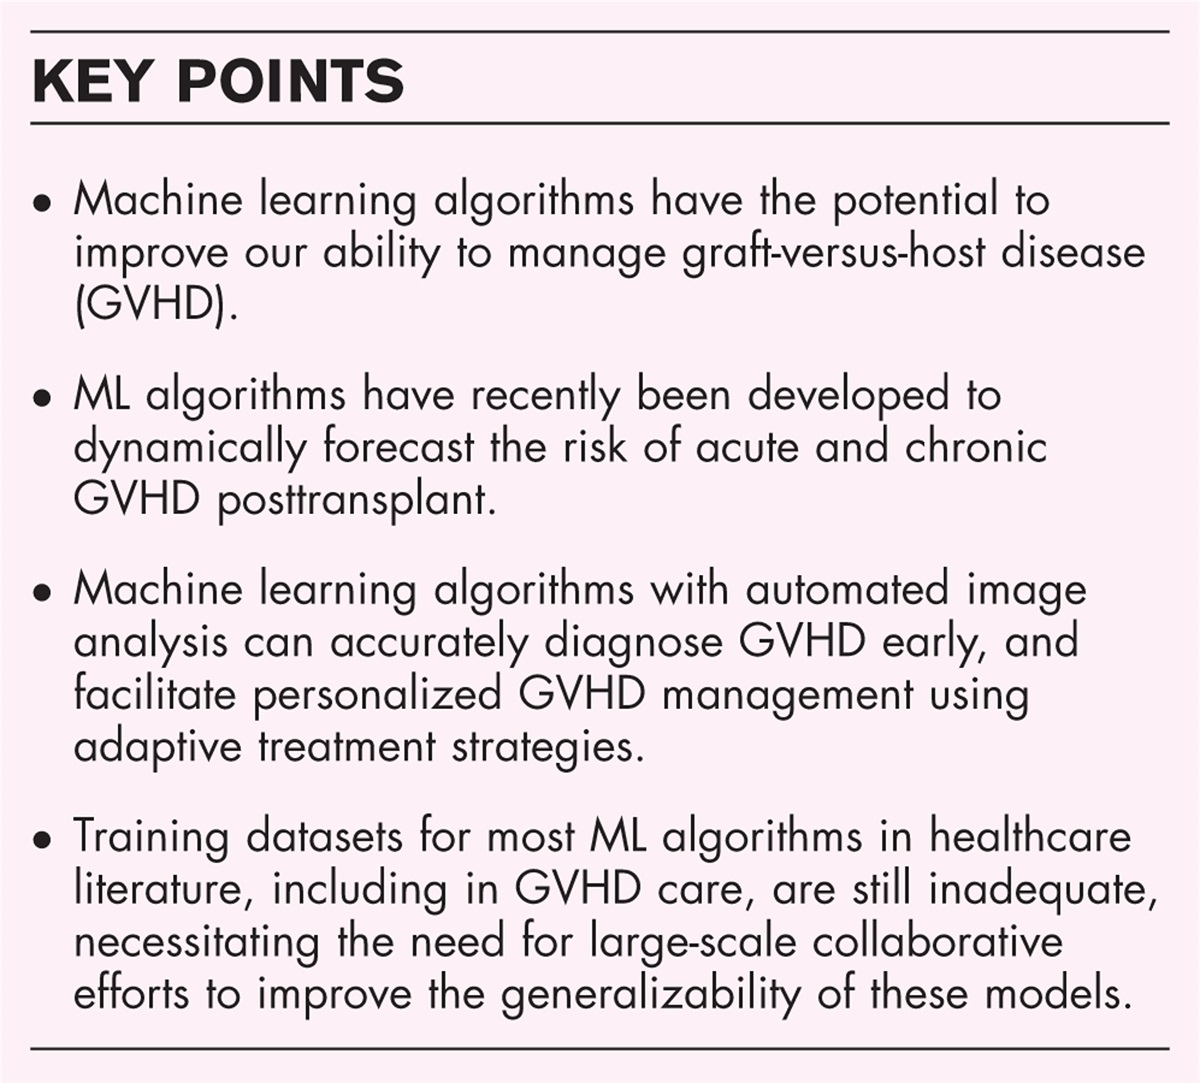 Machine learning applications and challenges in graft-versus-host disease: a scoping review